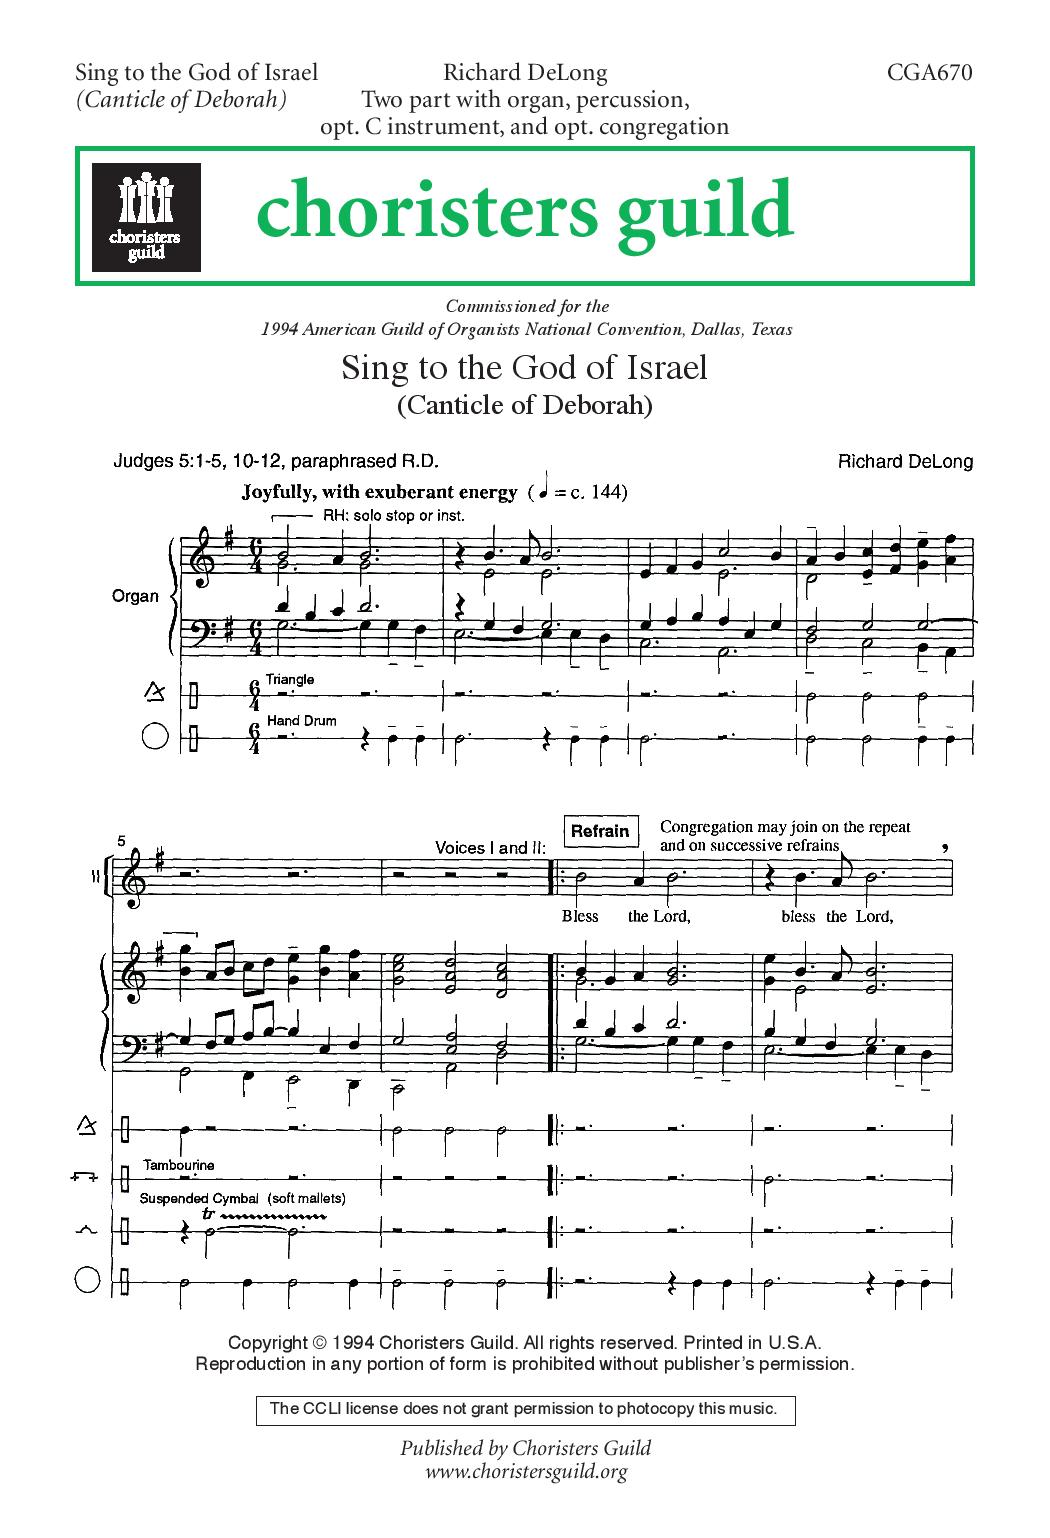 Sing to the God of Israel Canticle of Deborah